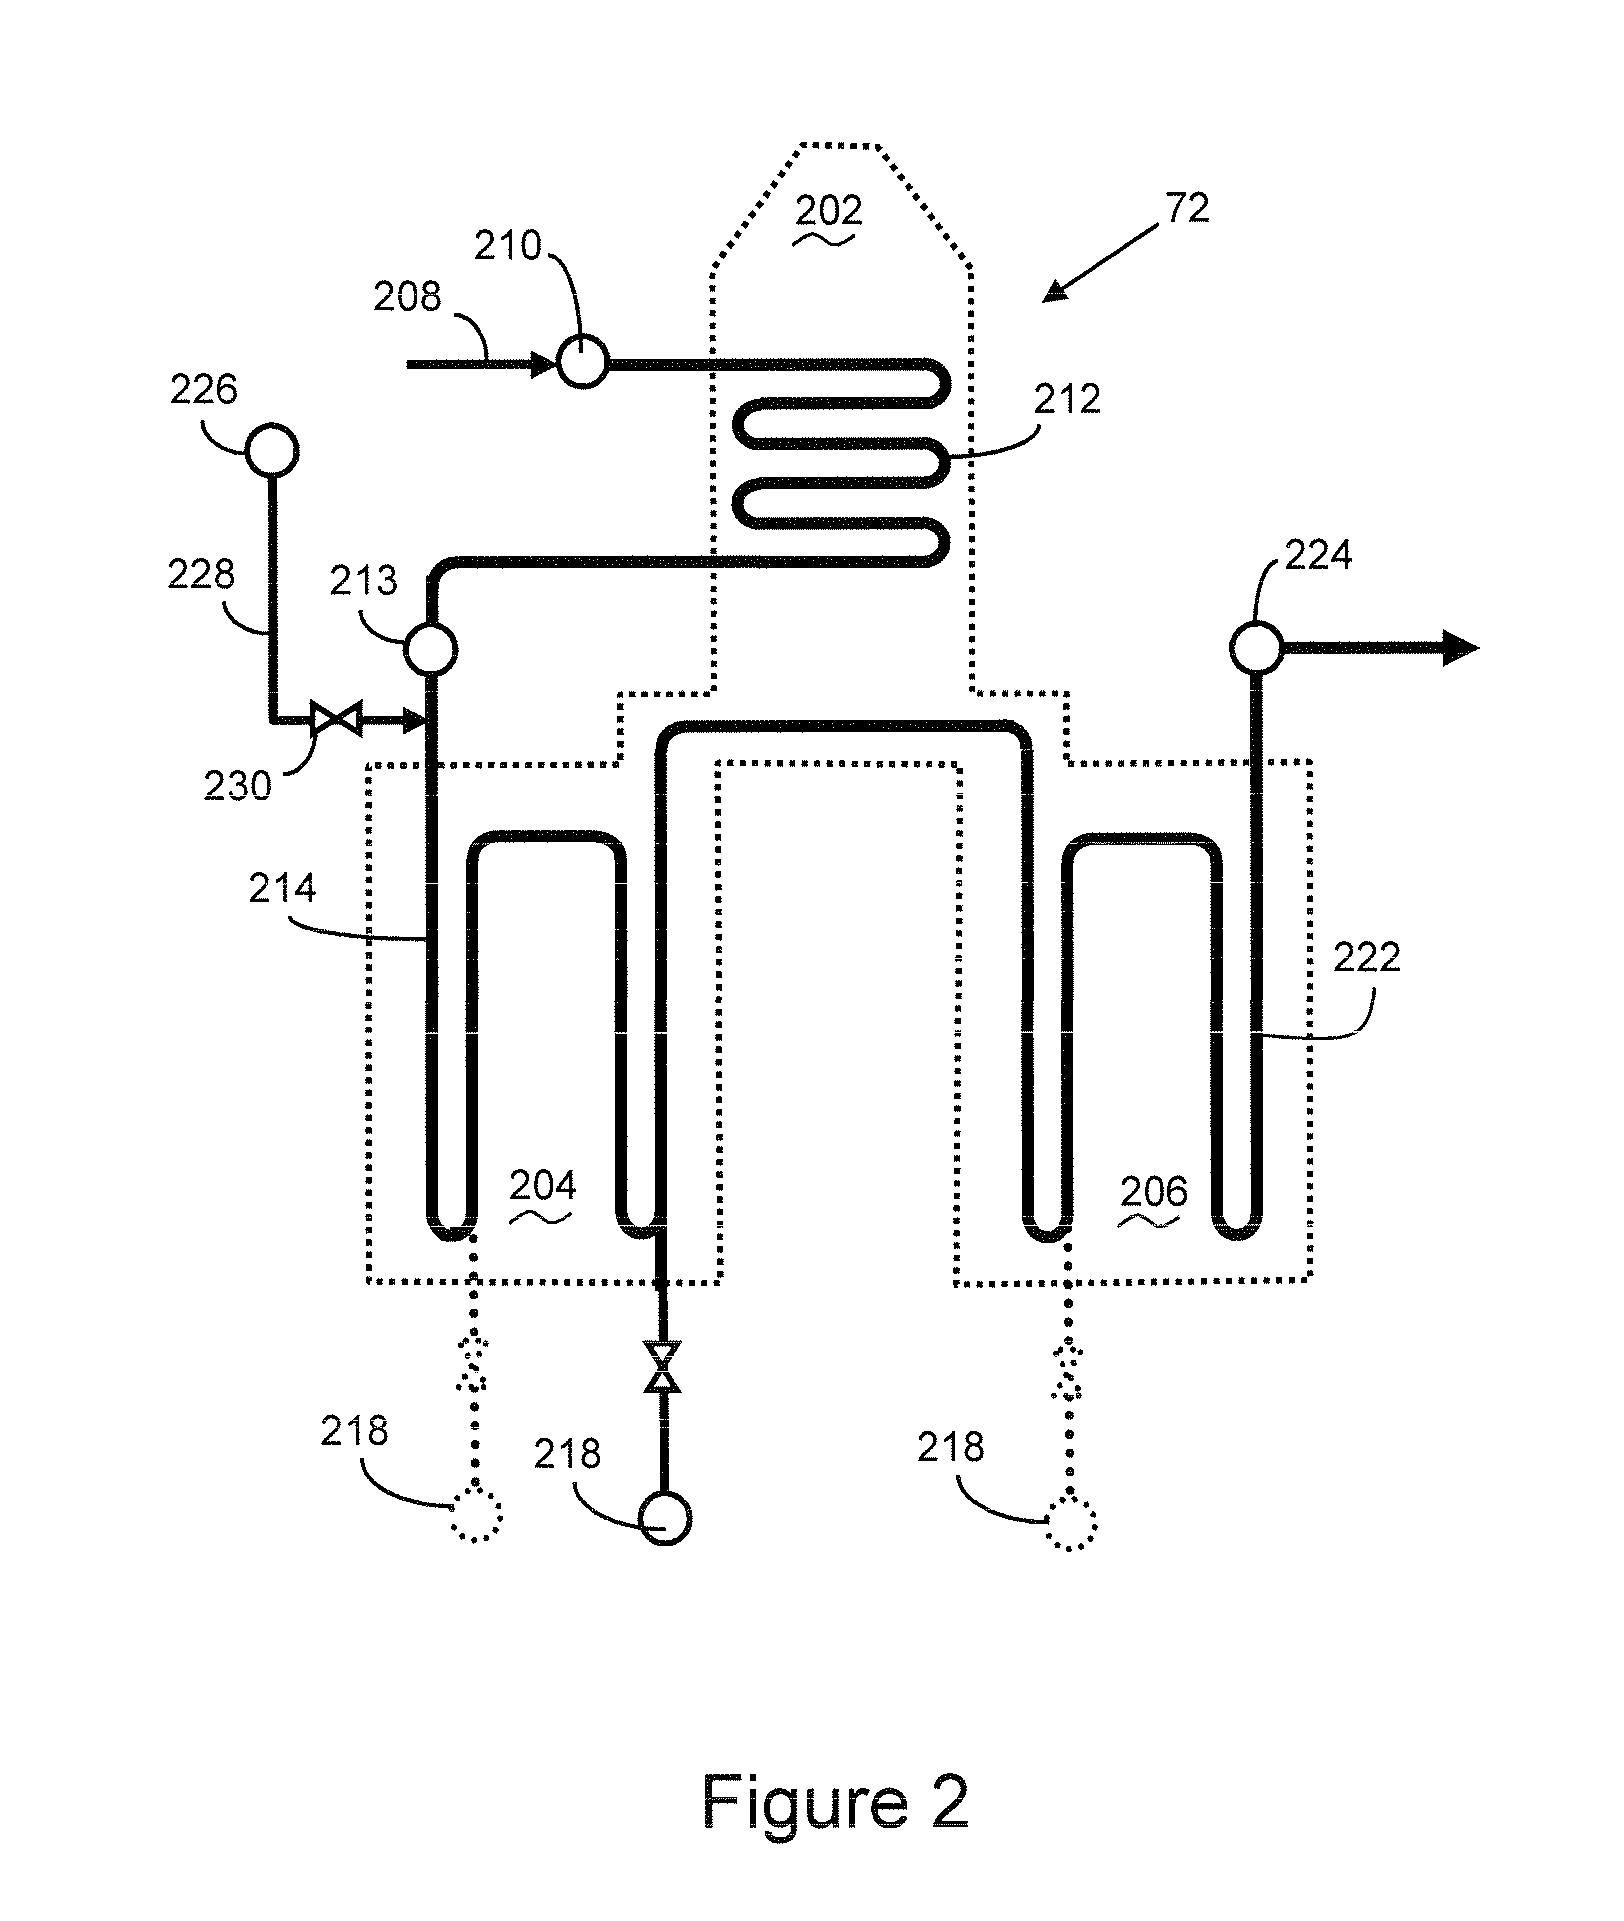 Method and apparatus for production of direct reduced iron (DRI) utilizing coke oven gas